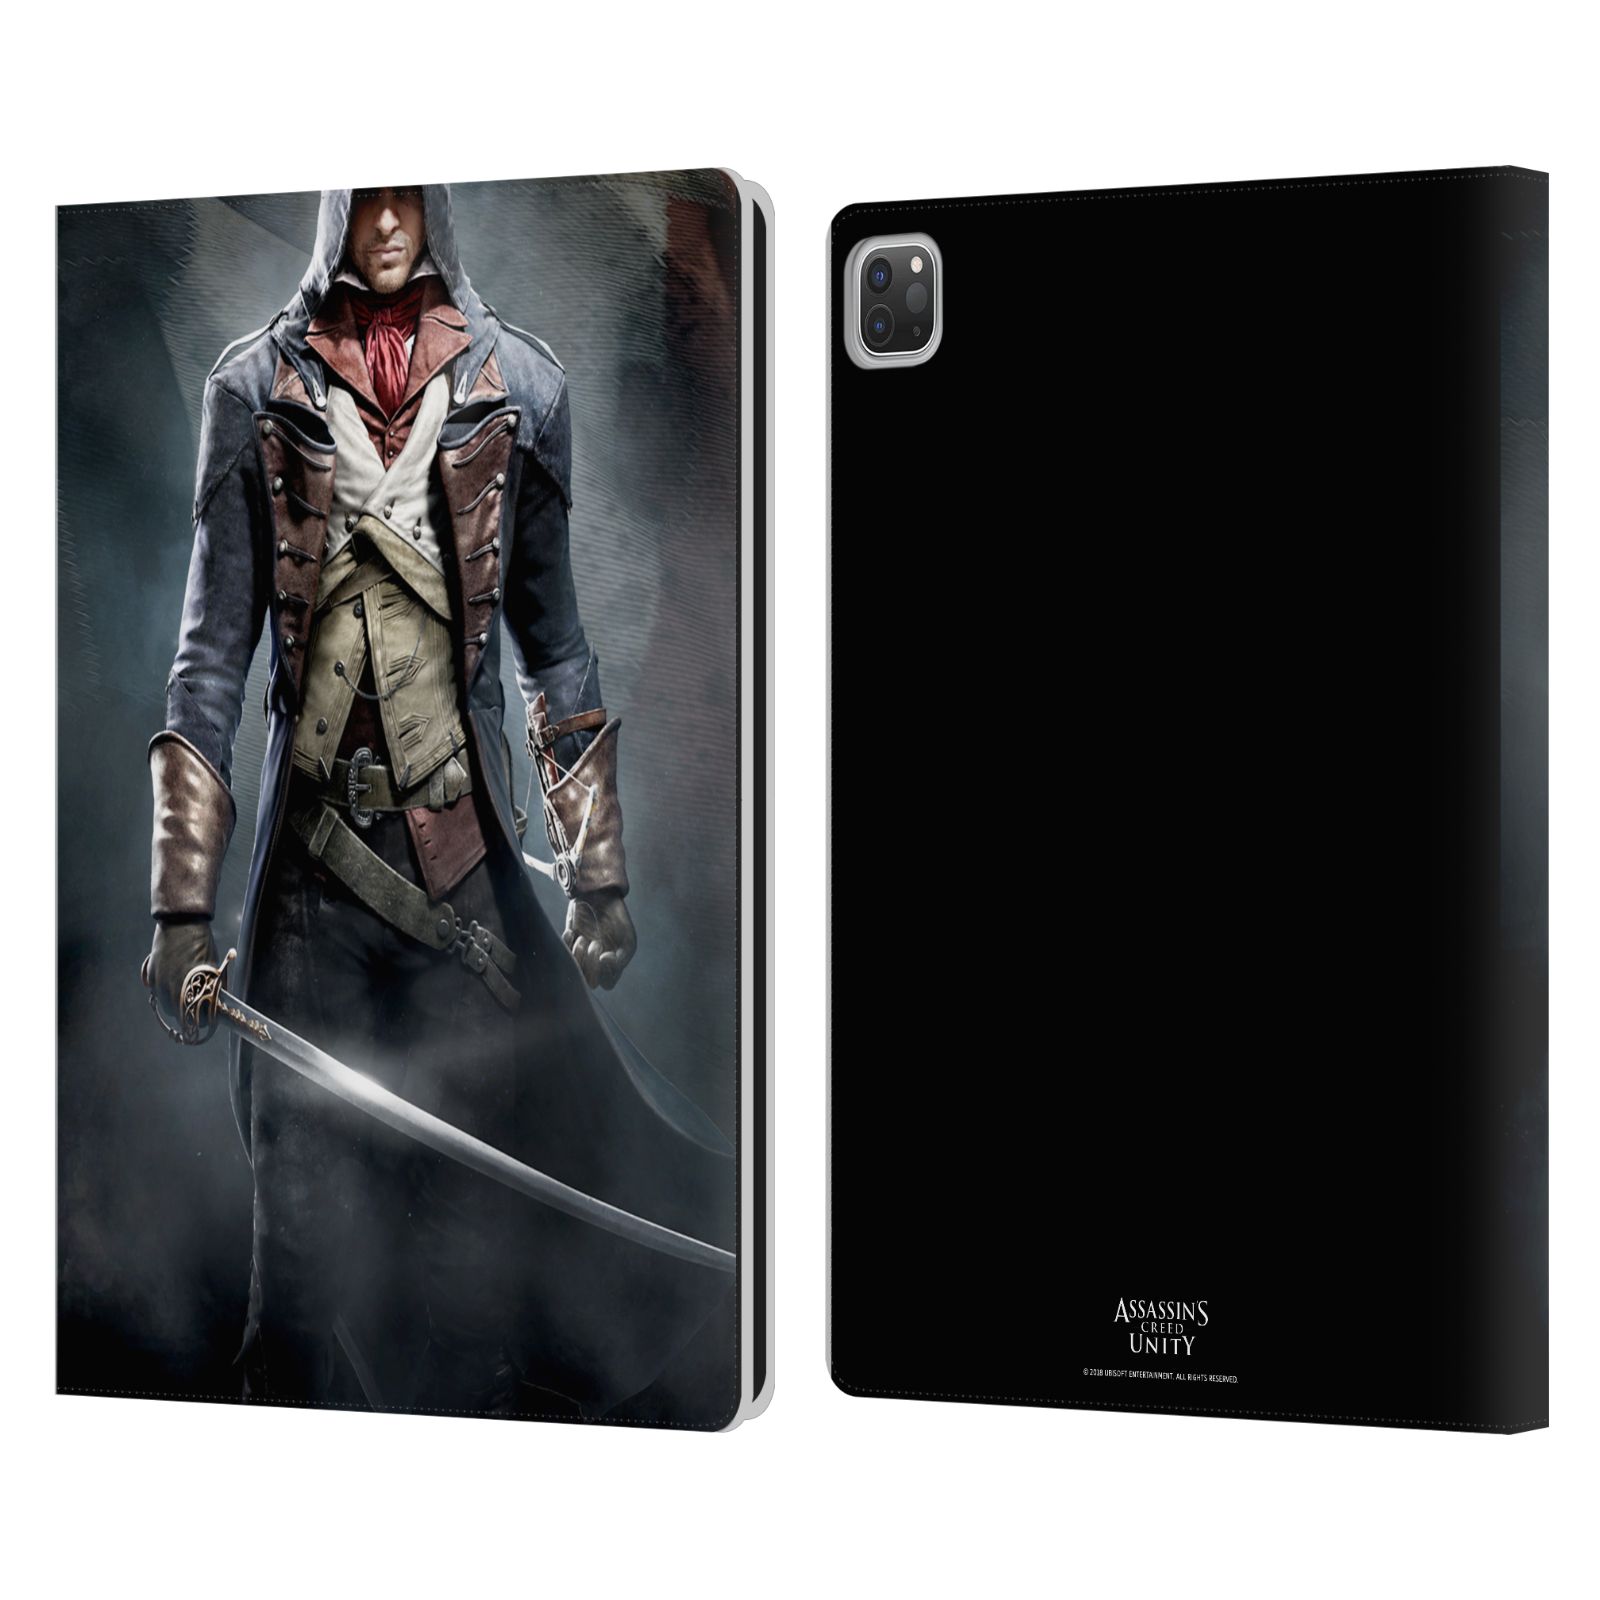 OFFICIAL ASSASSIN'S CREED UNITY KEY ART LEATHER BOOK WALLET CASE FOR APPLE iPAD